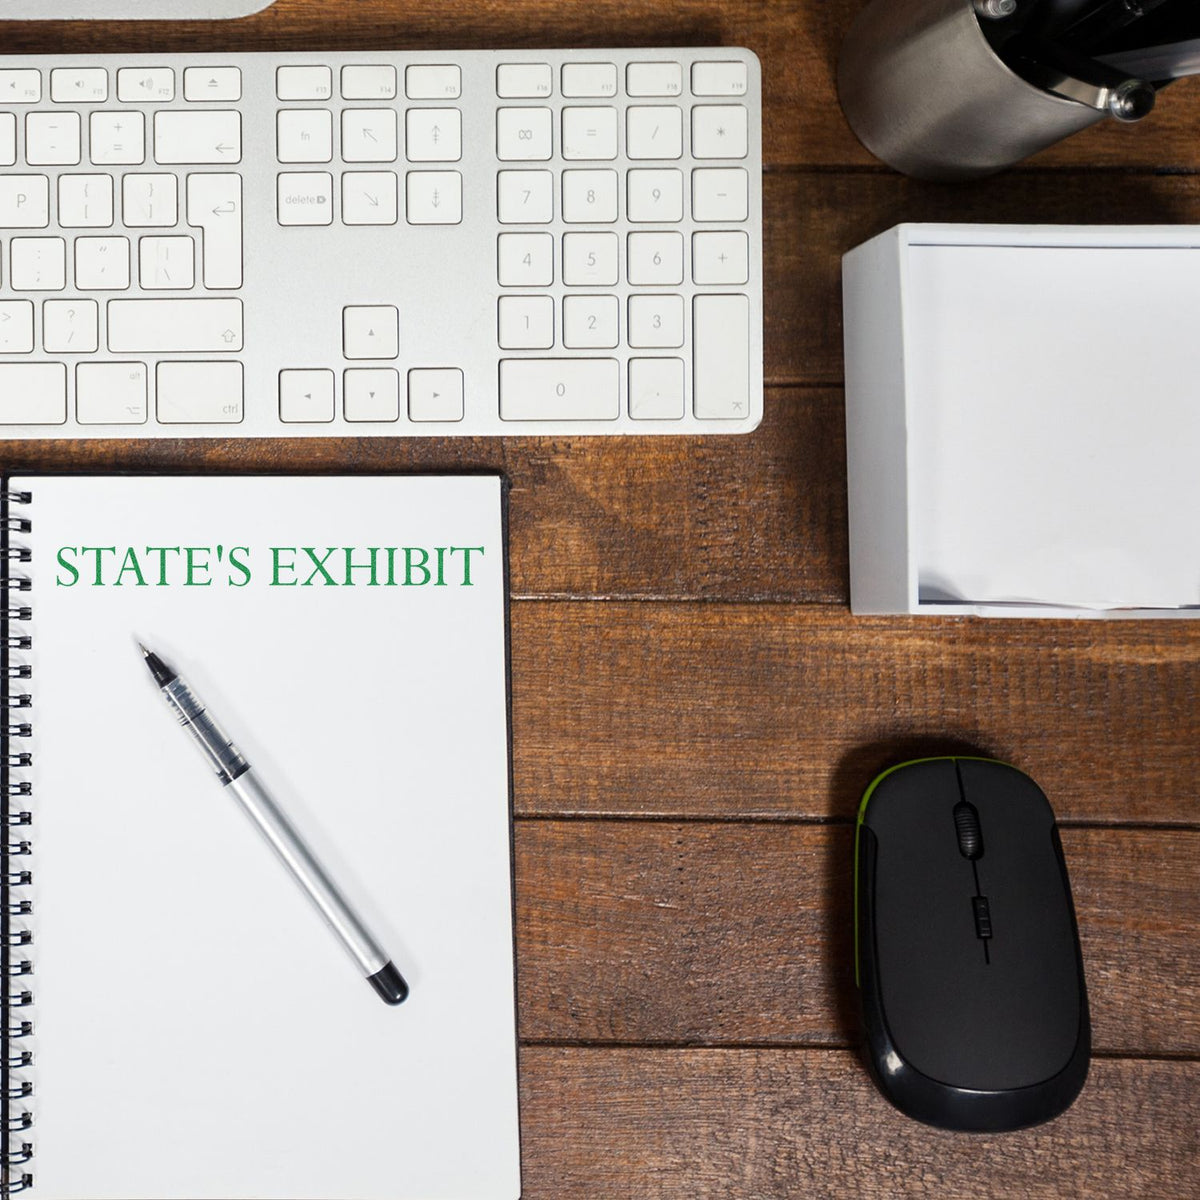 Large States Exhibit Rubber Stamp In Use